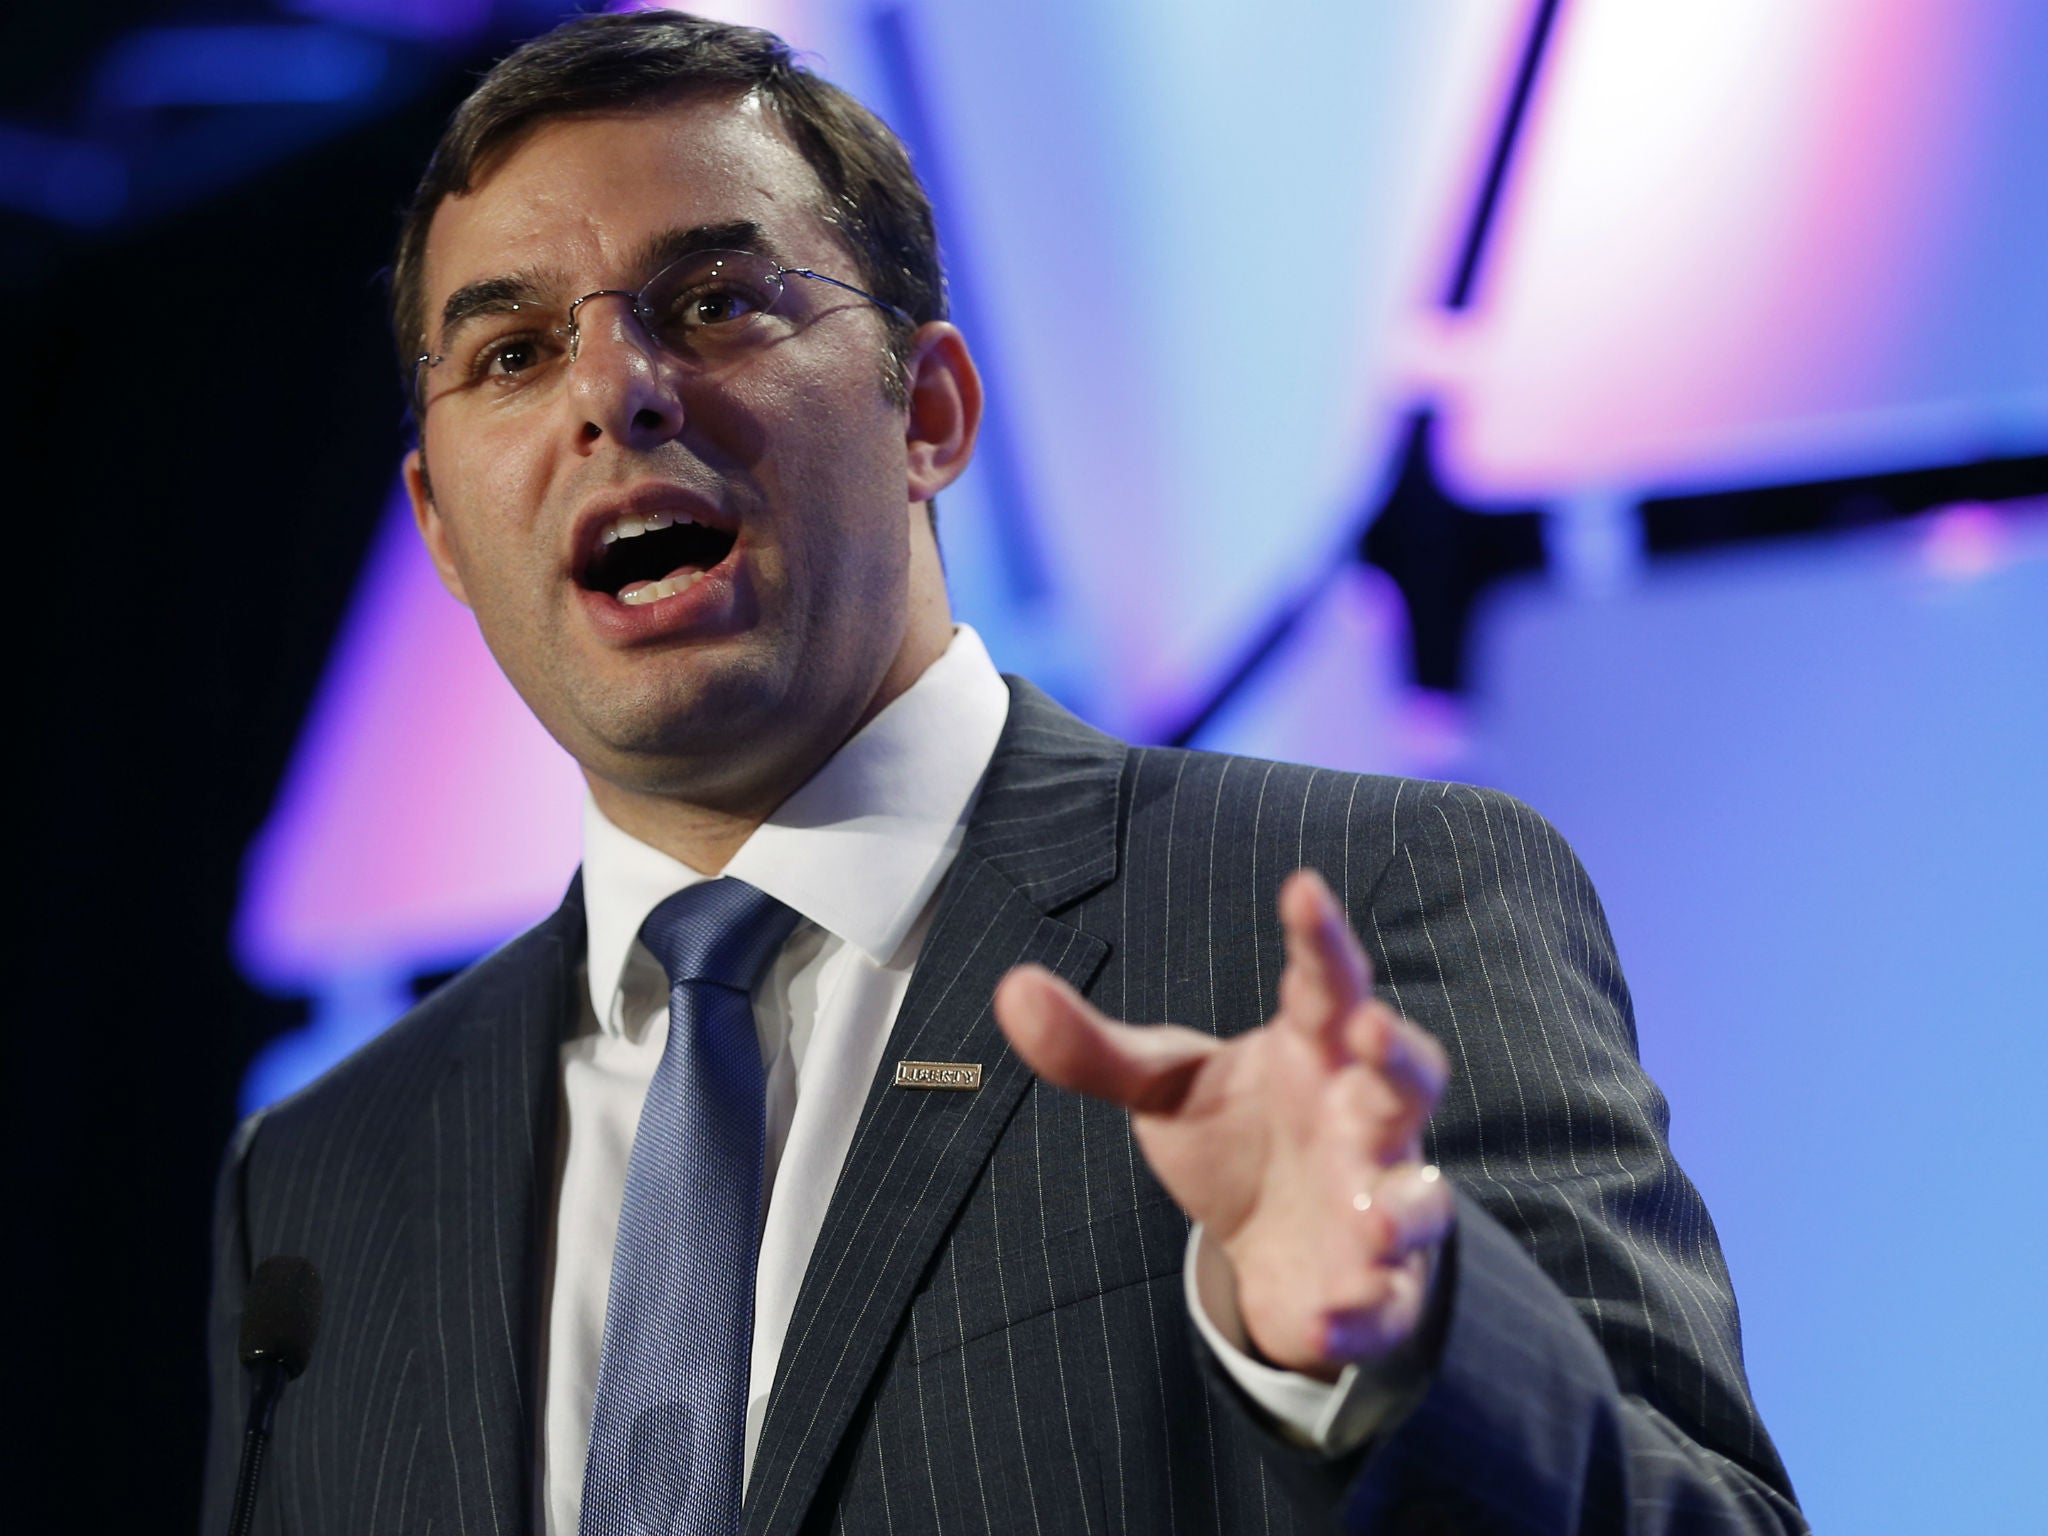 Justin Amash: Republican congressman says third party 2020 run against Trump not 'off the table'